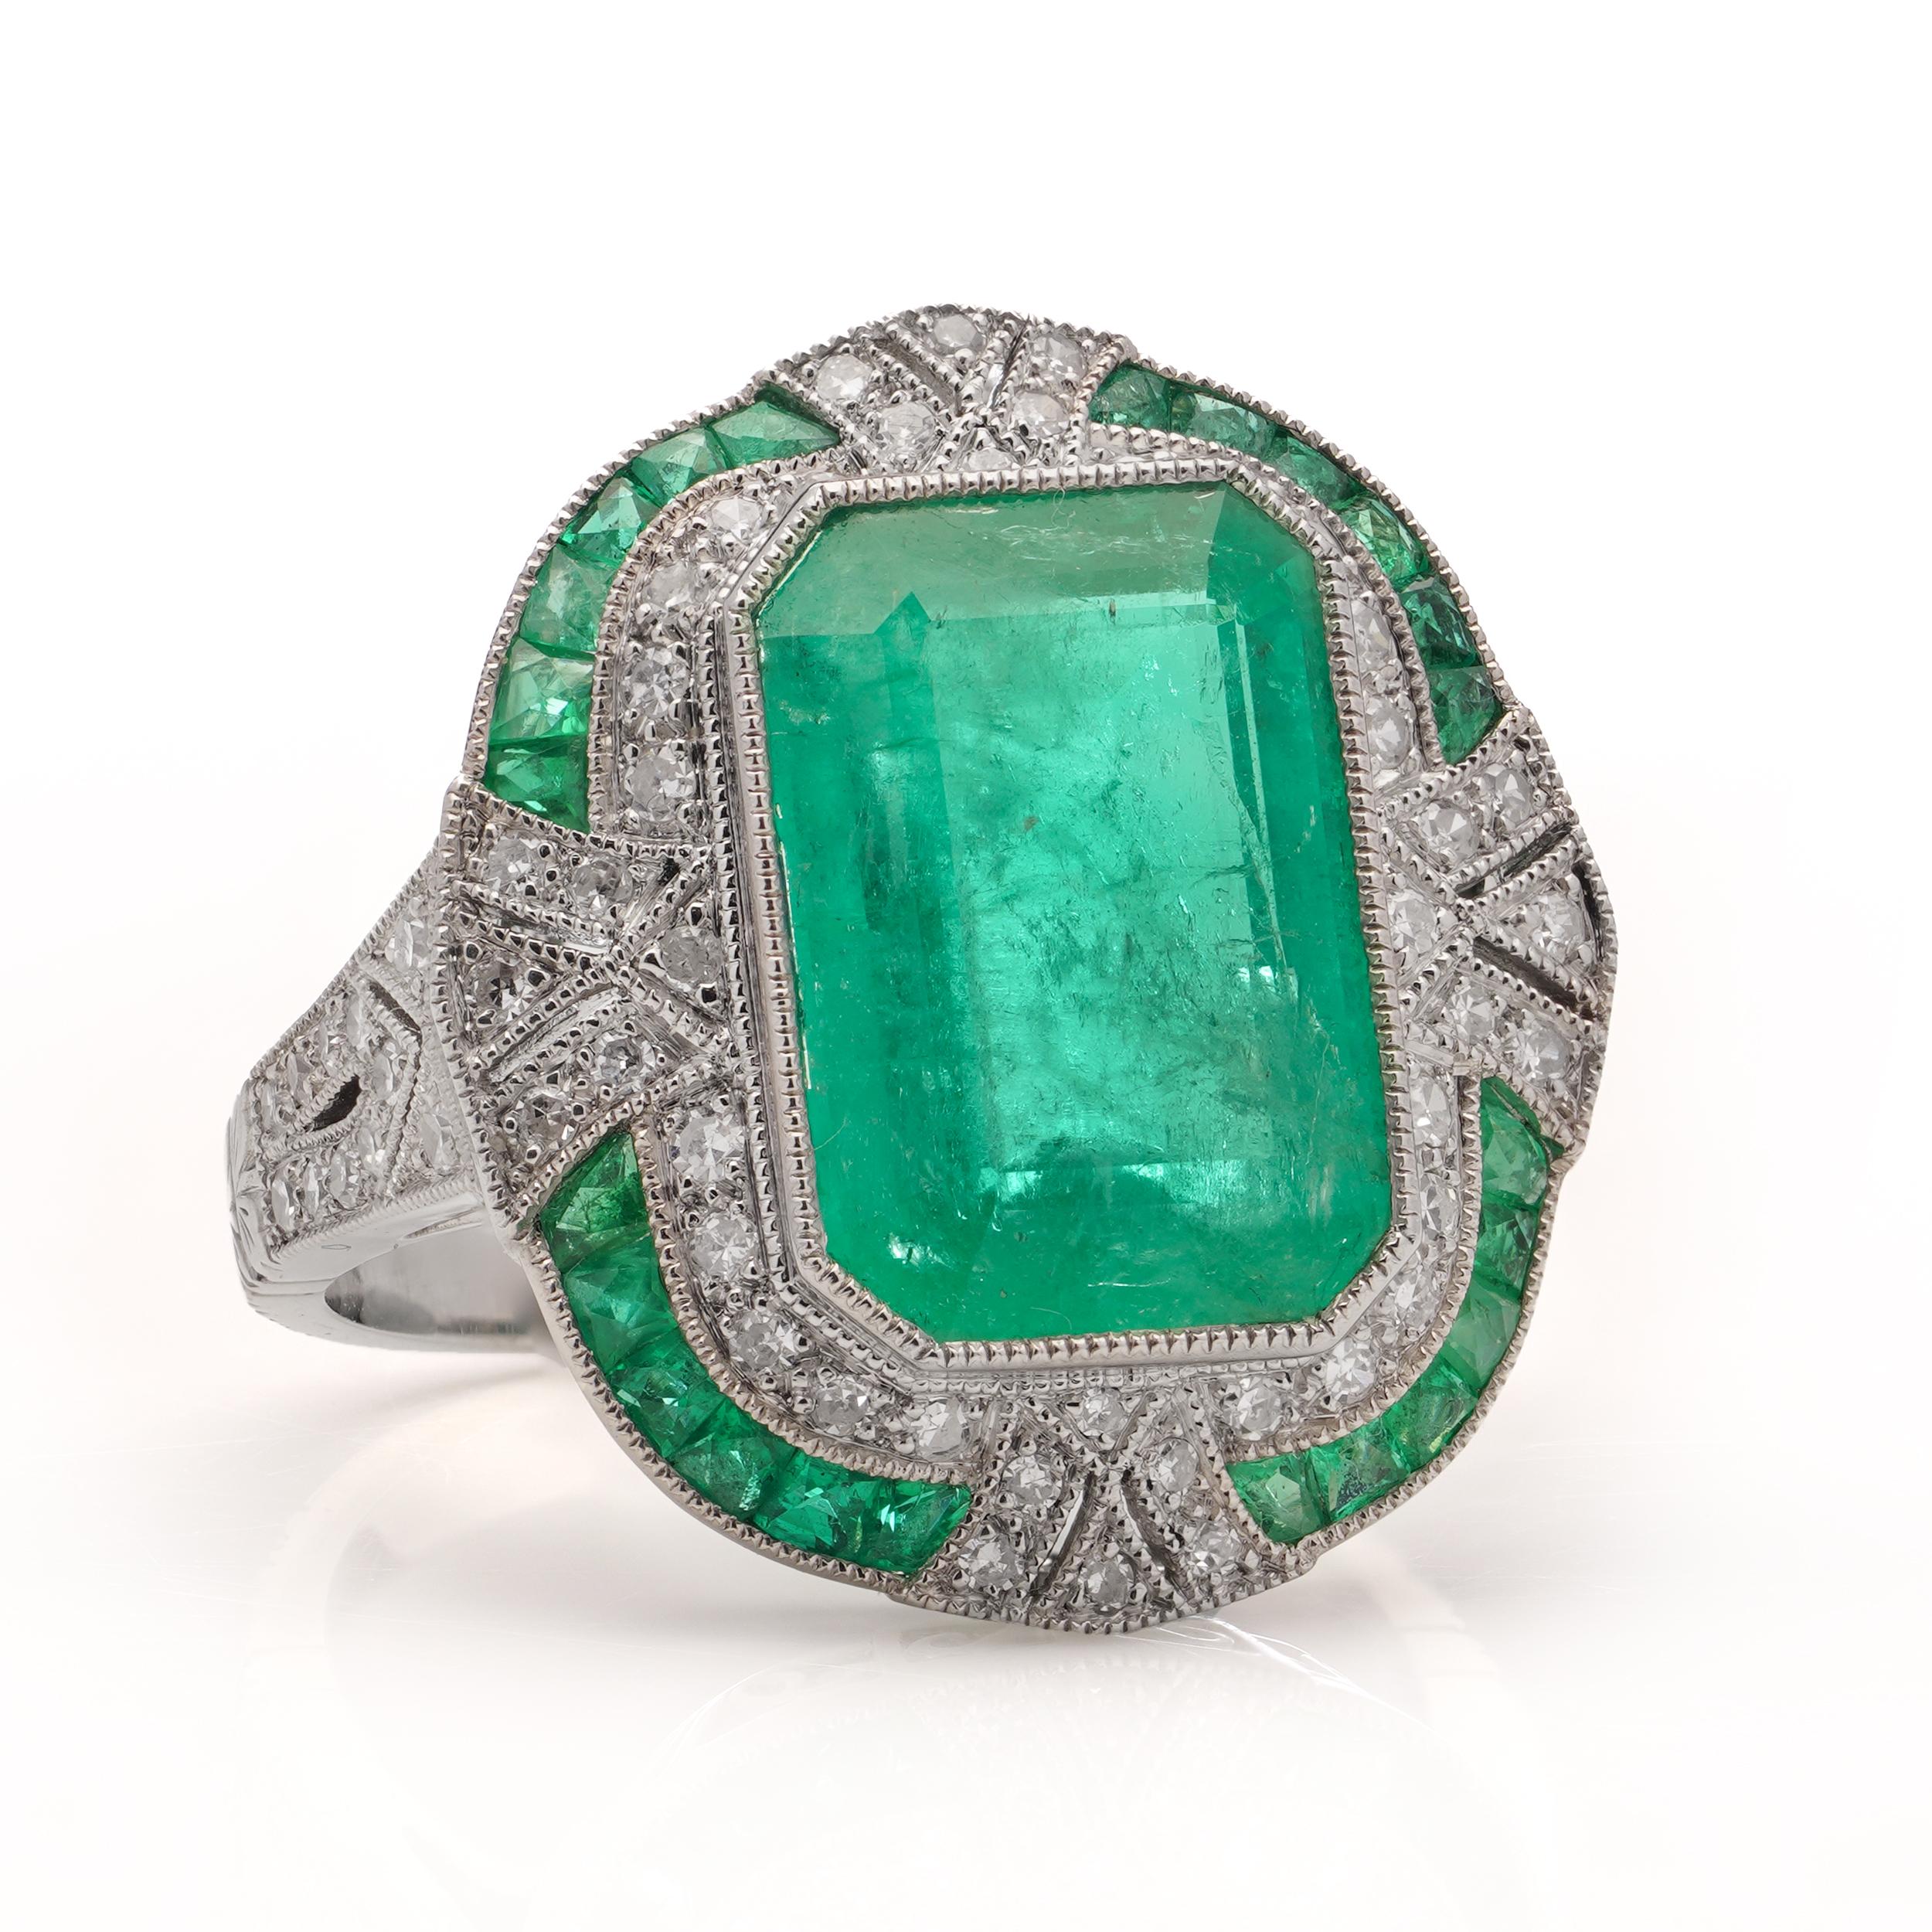 Platinum Art Deco-inspired 4.21 carats of Emerald fashion ring For Sale 1